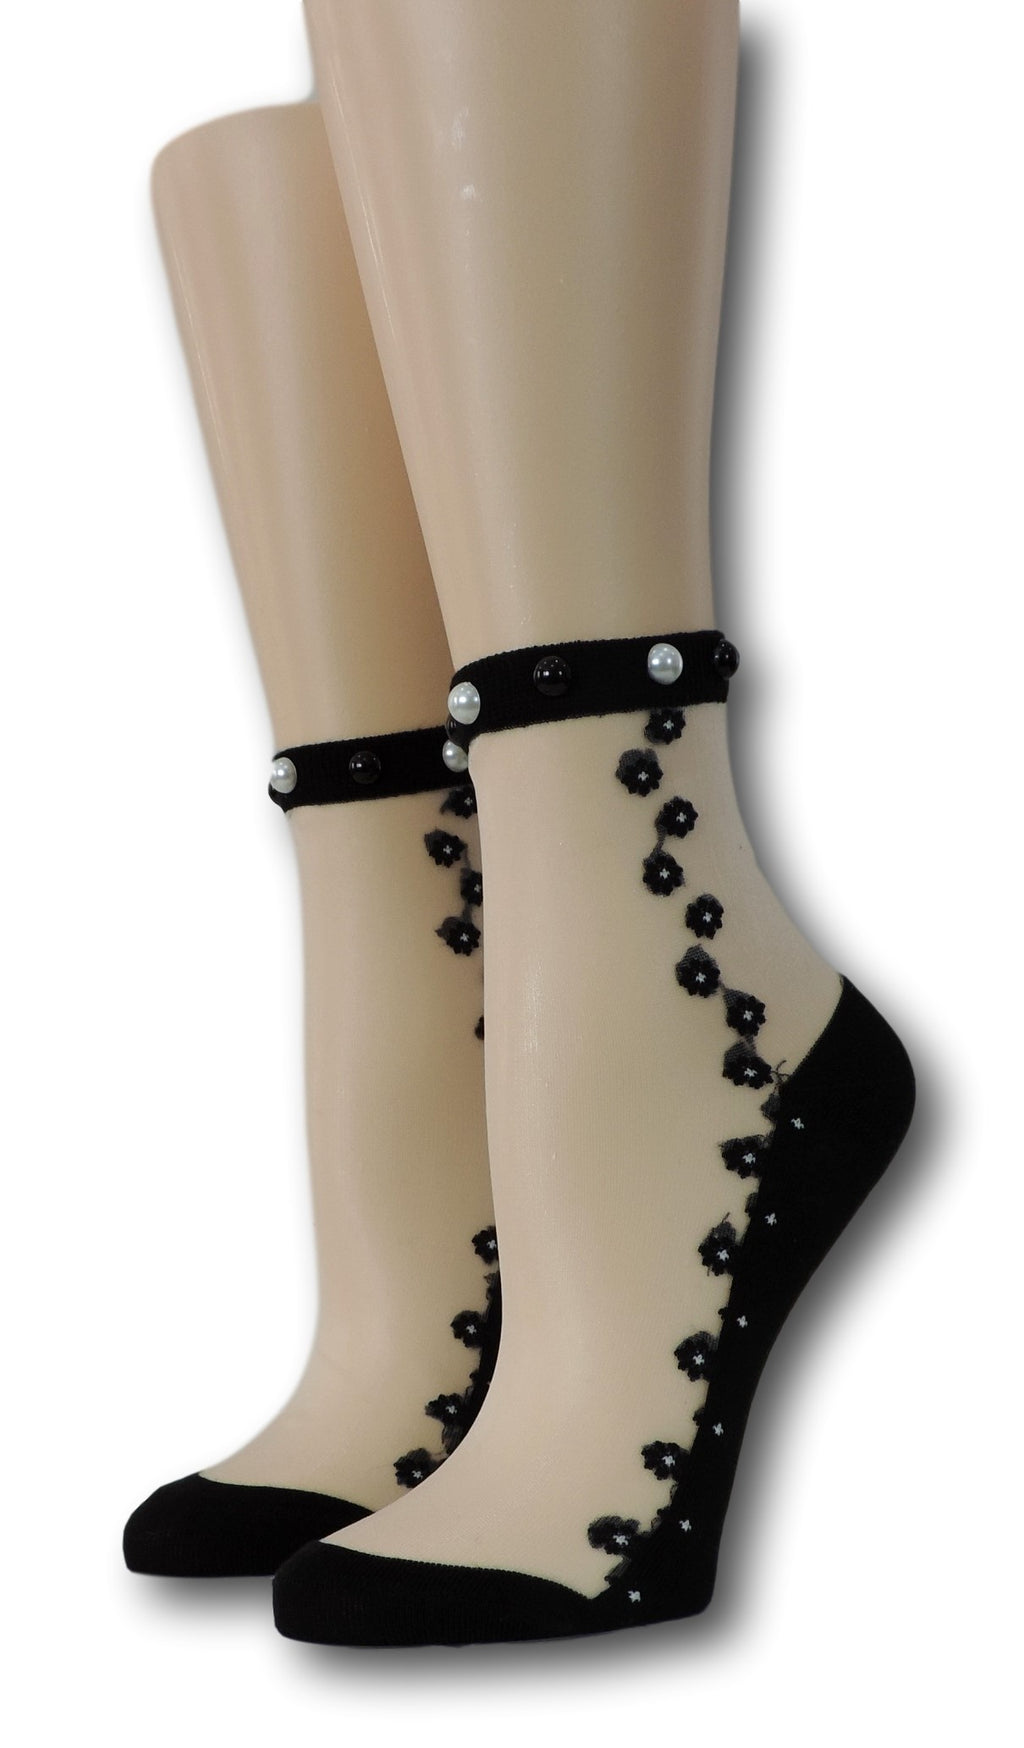 Black Seamless Floral Sheer Socks with beads